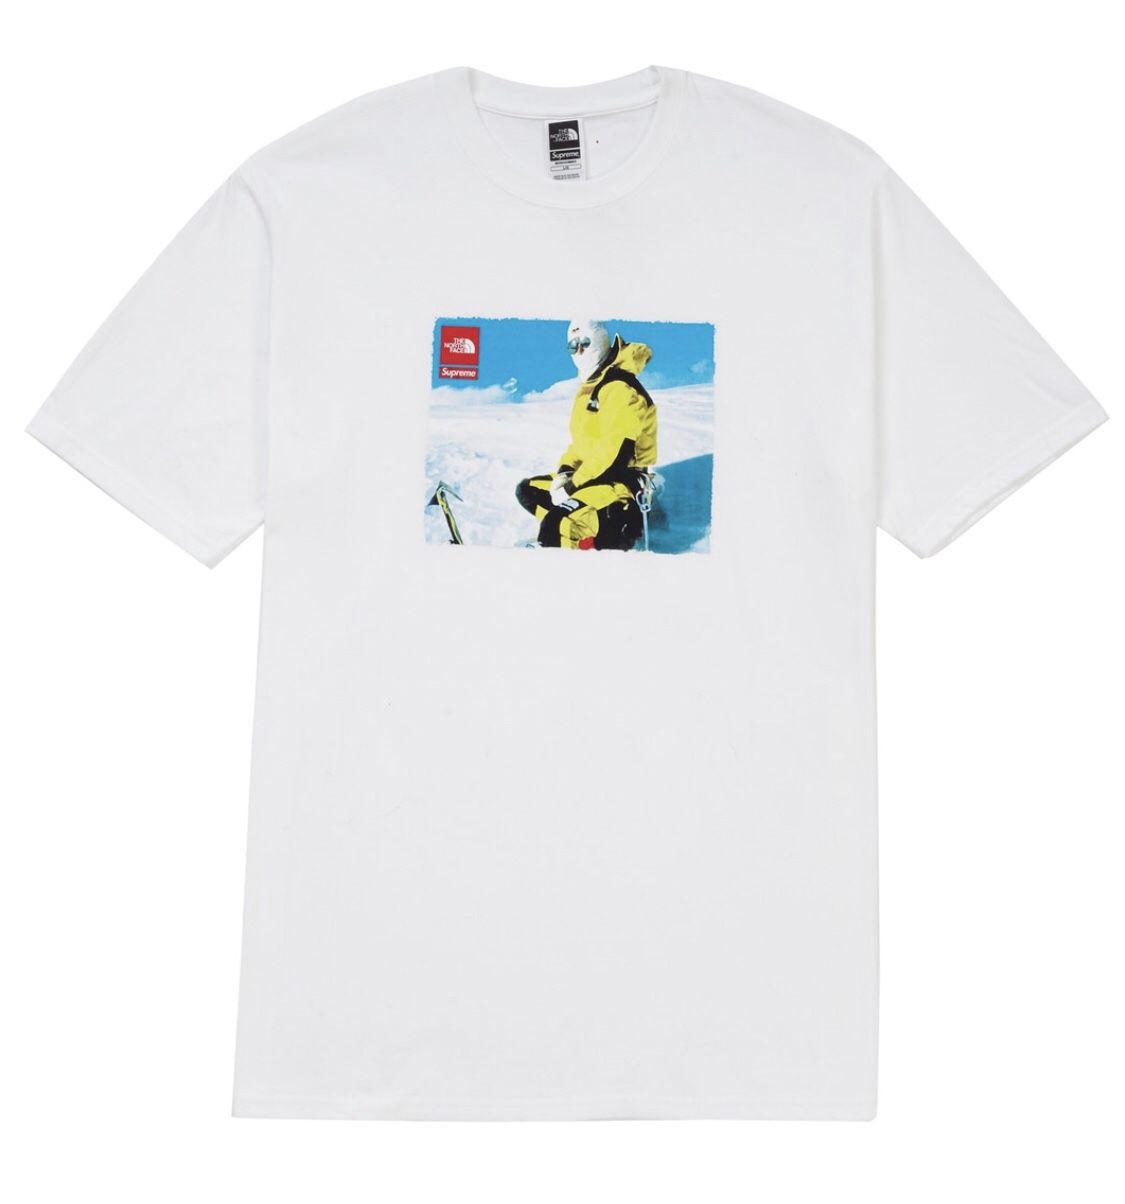 Supreme x The North Face Photo Tee Size L